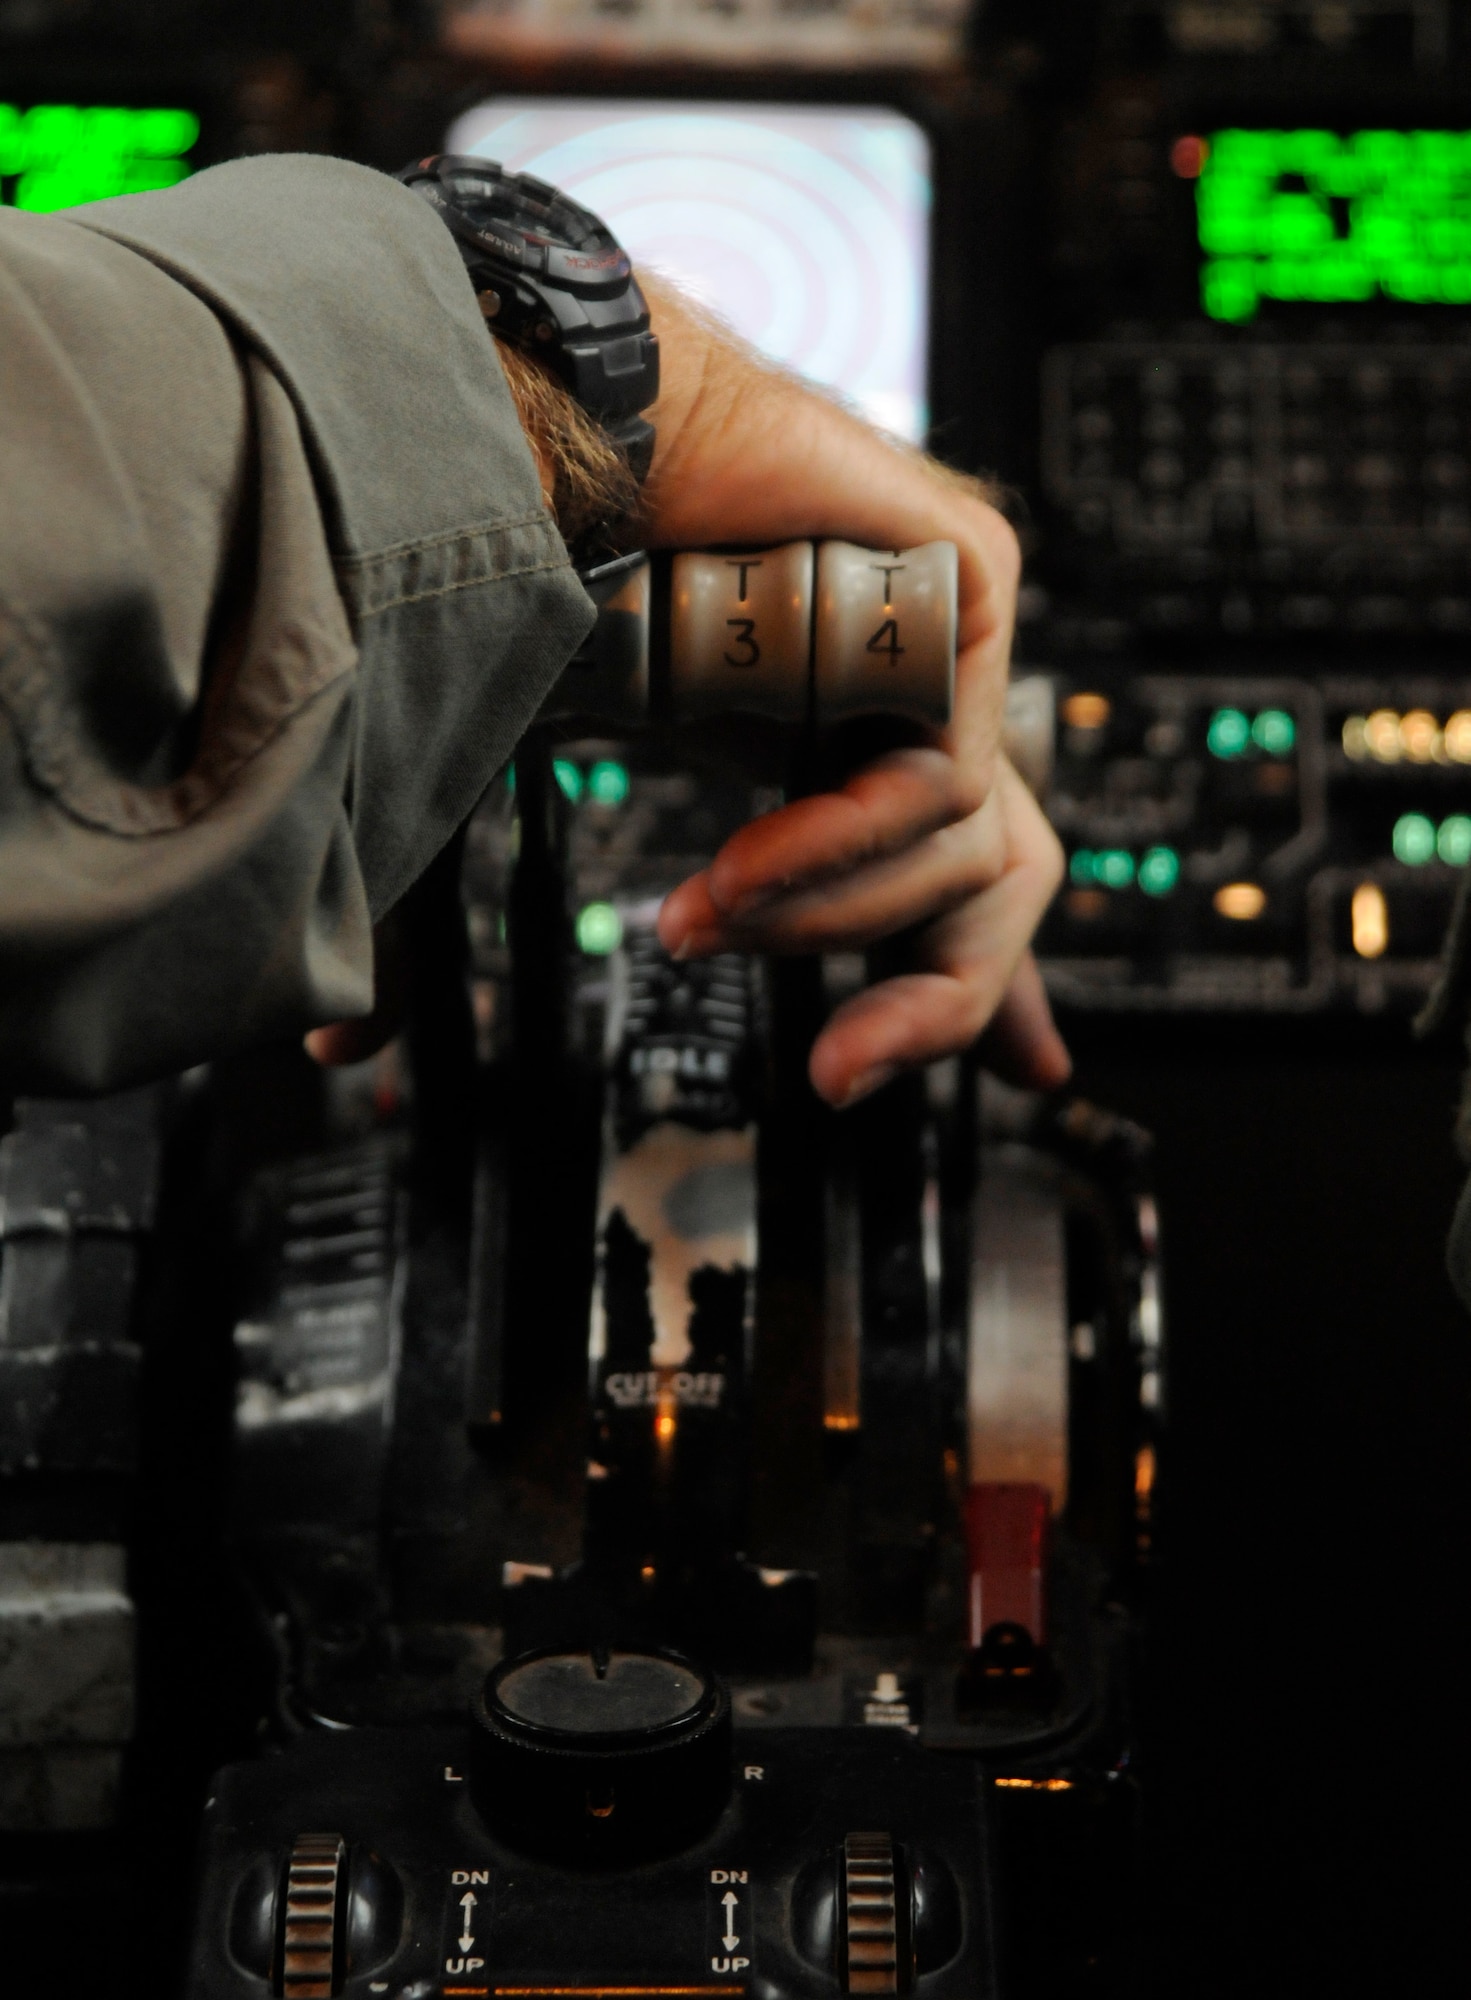 Col. Steven Berryhill, 90th Expeditionary Air Refueling Squadron KC-135 pilot, prepares to push the throttle for takeoff, Oct. 27, 2009 at Incirlik Air Base Turkey. The 90th EARS supports the ongoing mission for Operations Iraqi Freedom and Enduring Freedom. (U.S. Air Force photo/Airman 1st Class Amber Ashcraft)